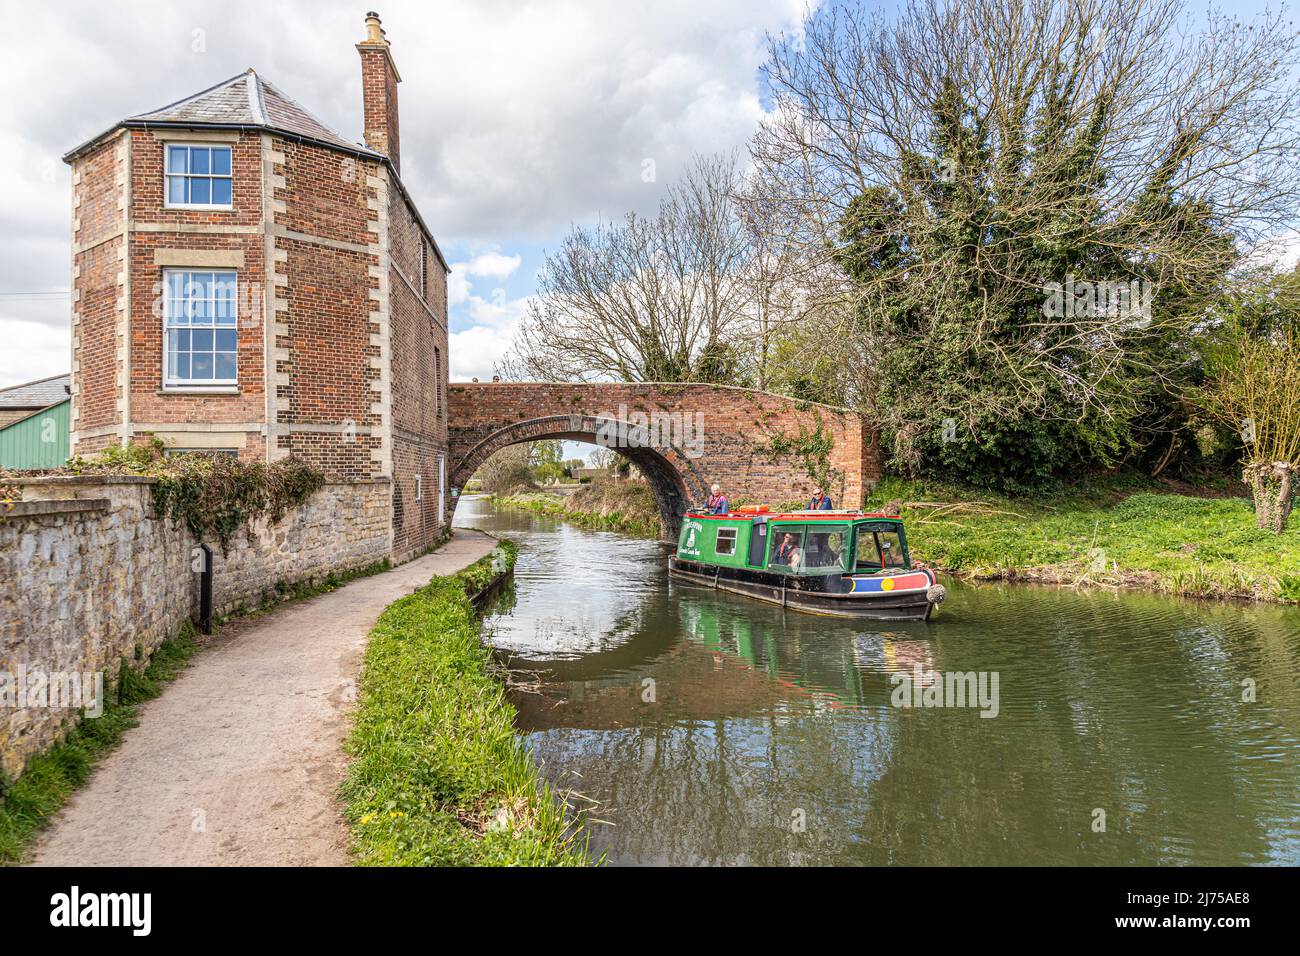 The Cotswold Canals Trust long boat Endeavour on the restored Stroudwater Canal passing Nutshell Bridge and House, Stonehouse, Gloucestershire, UK Stock Photo